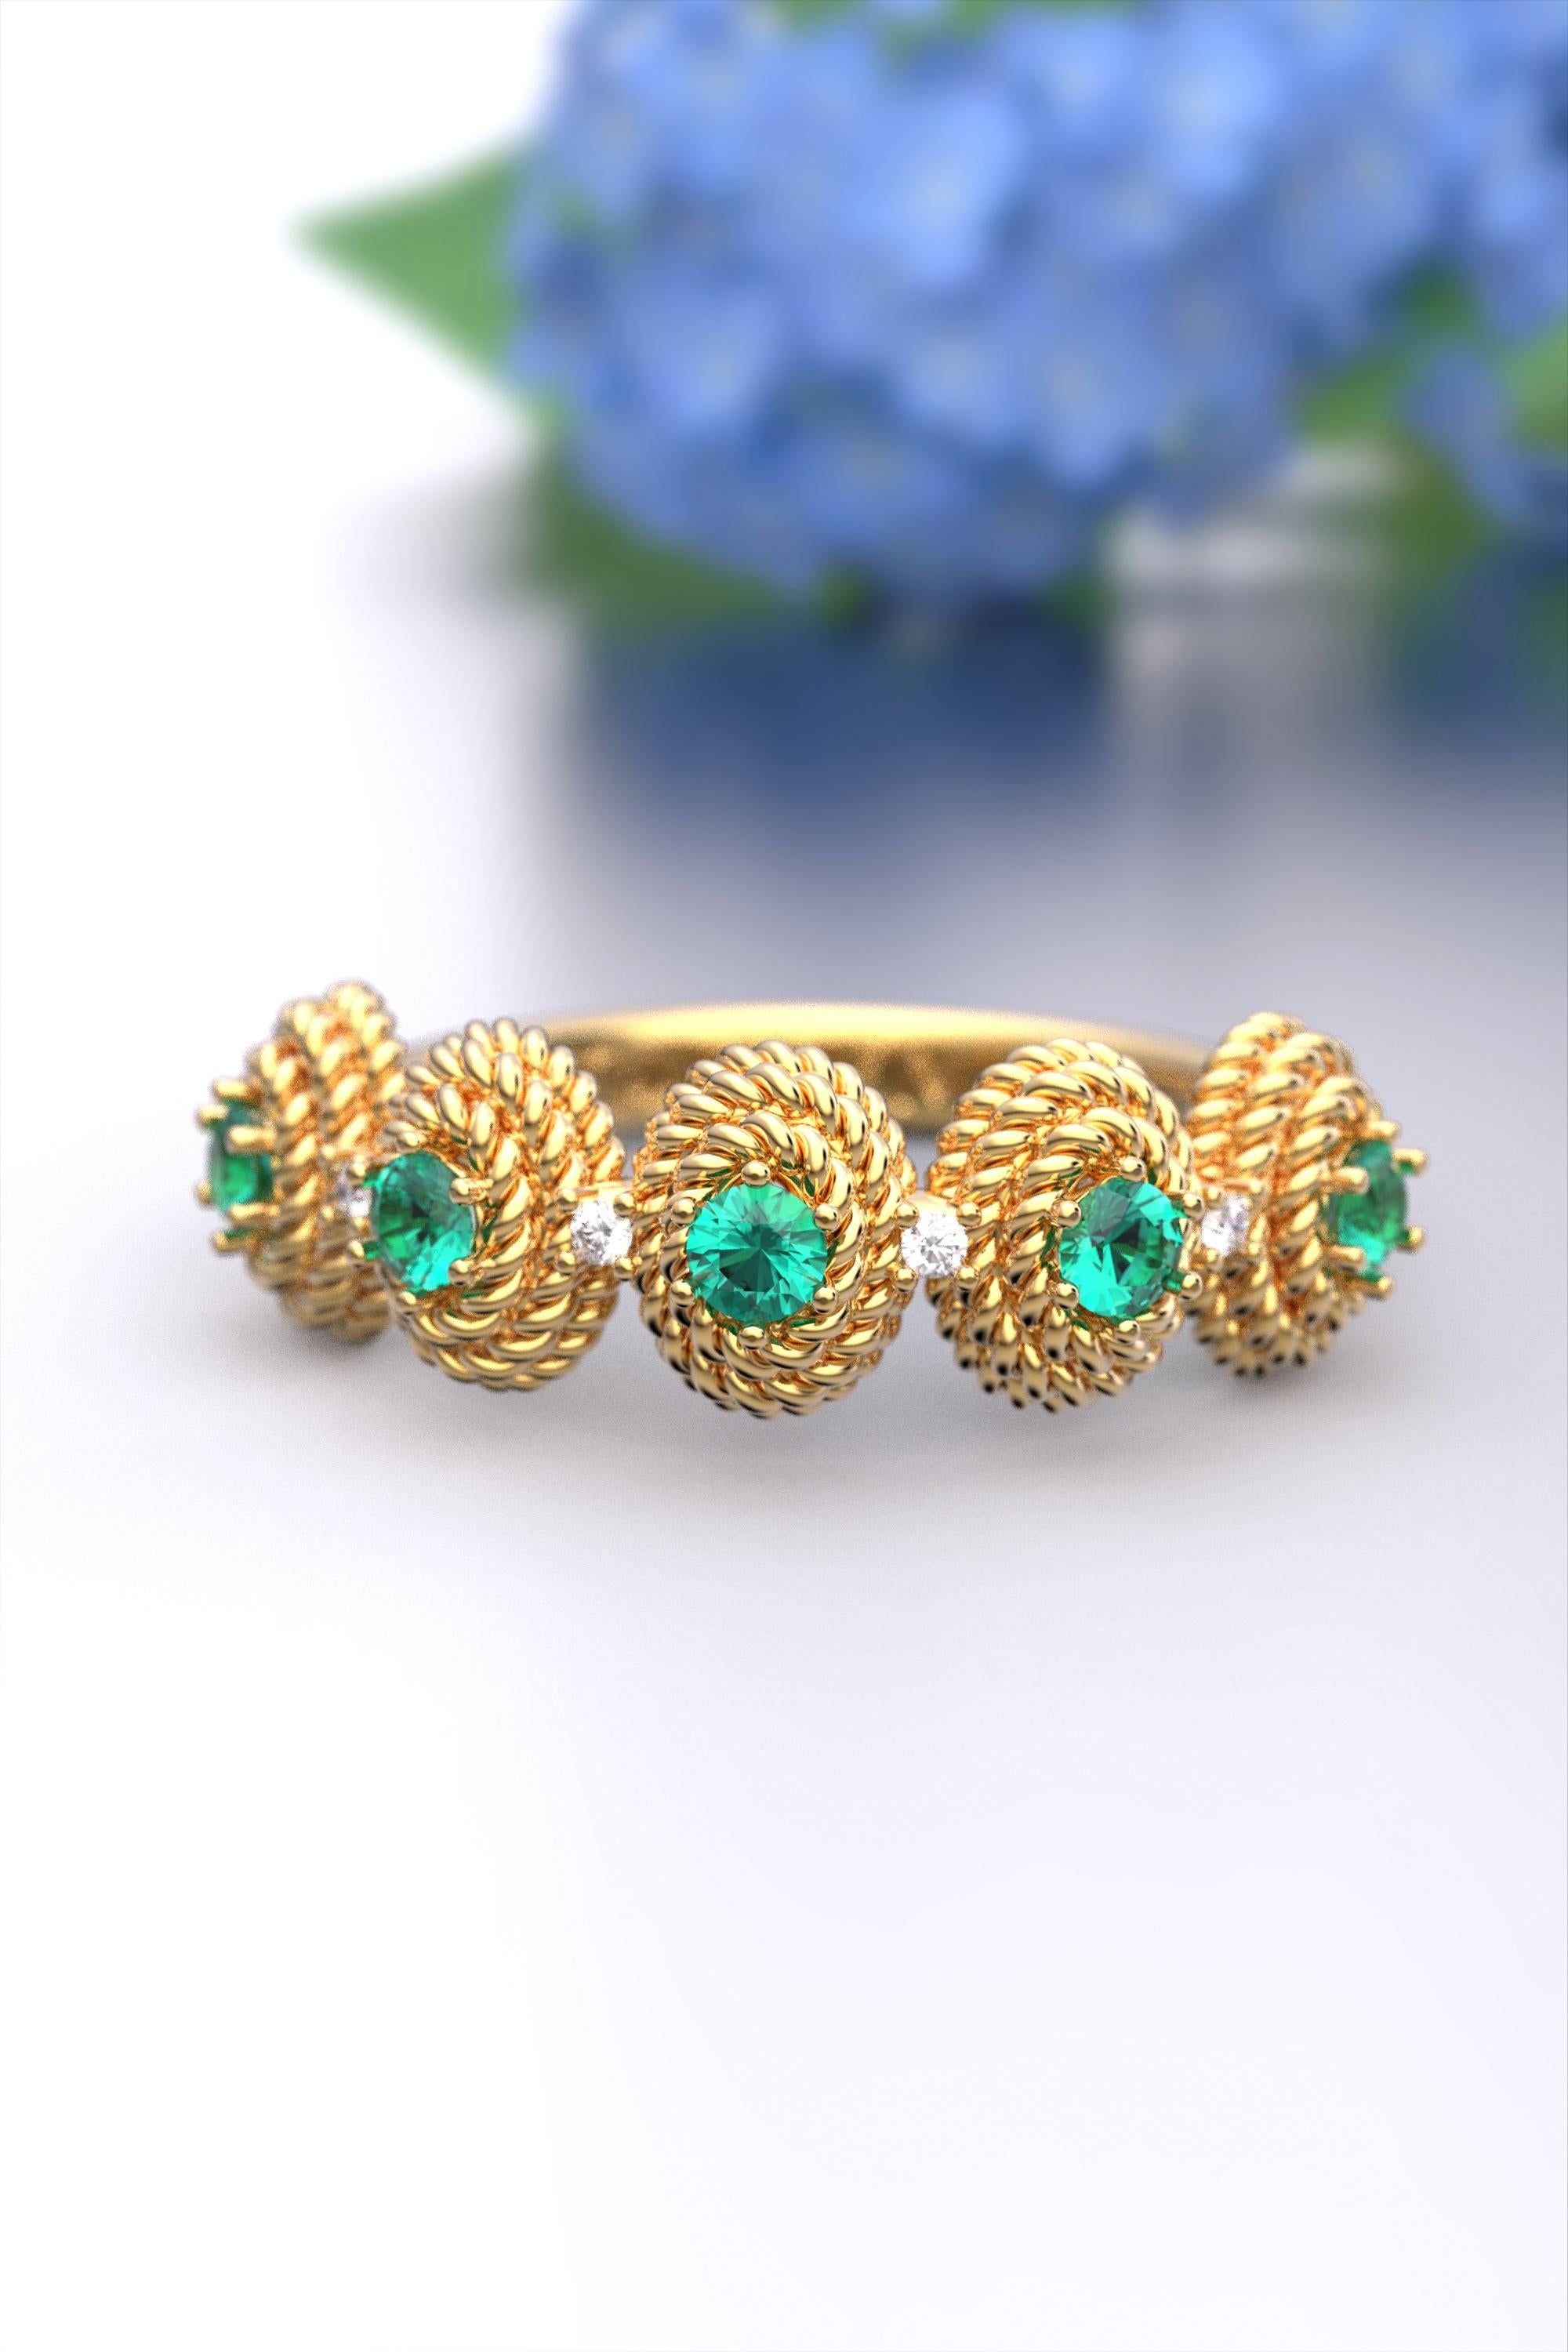 For Sale:  Emerald and Diamond Ring Made in Italy in 14k Gold by Oltremare Gioielli 2